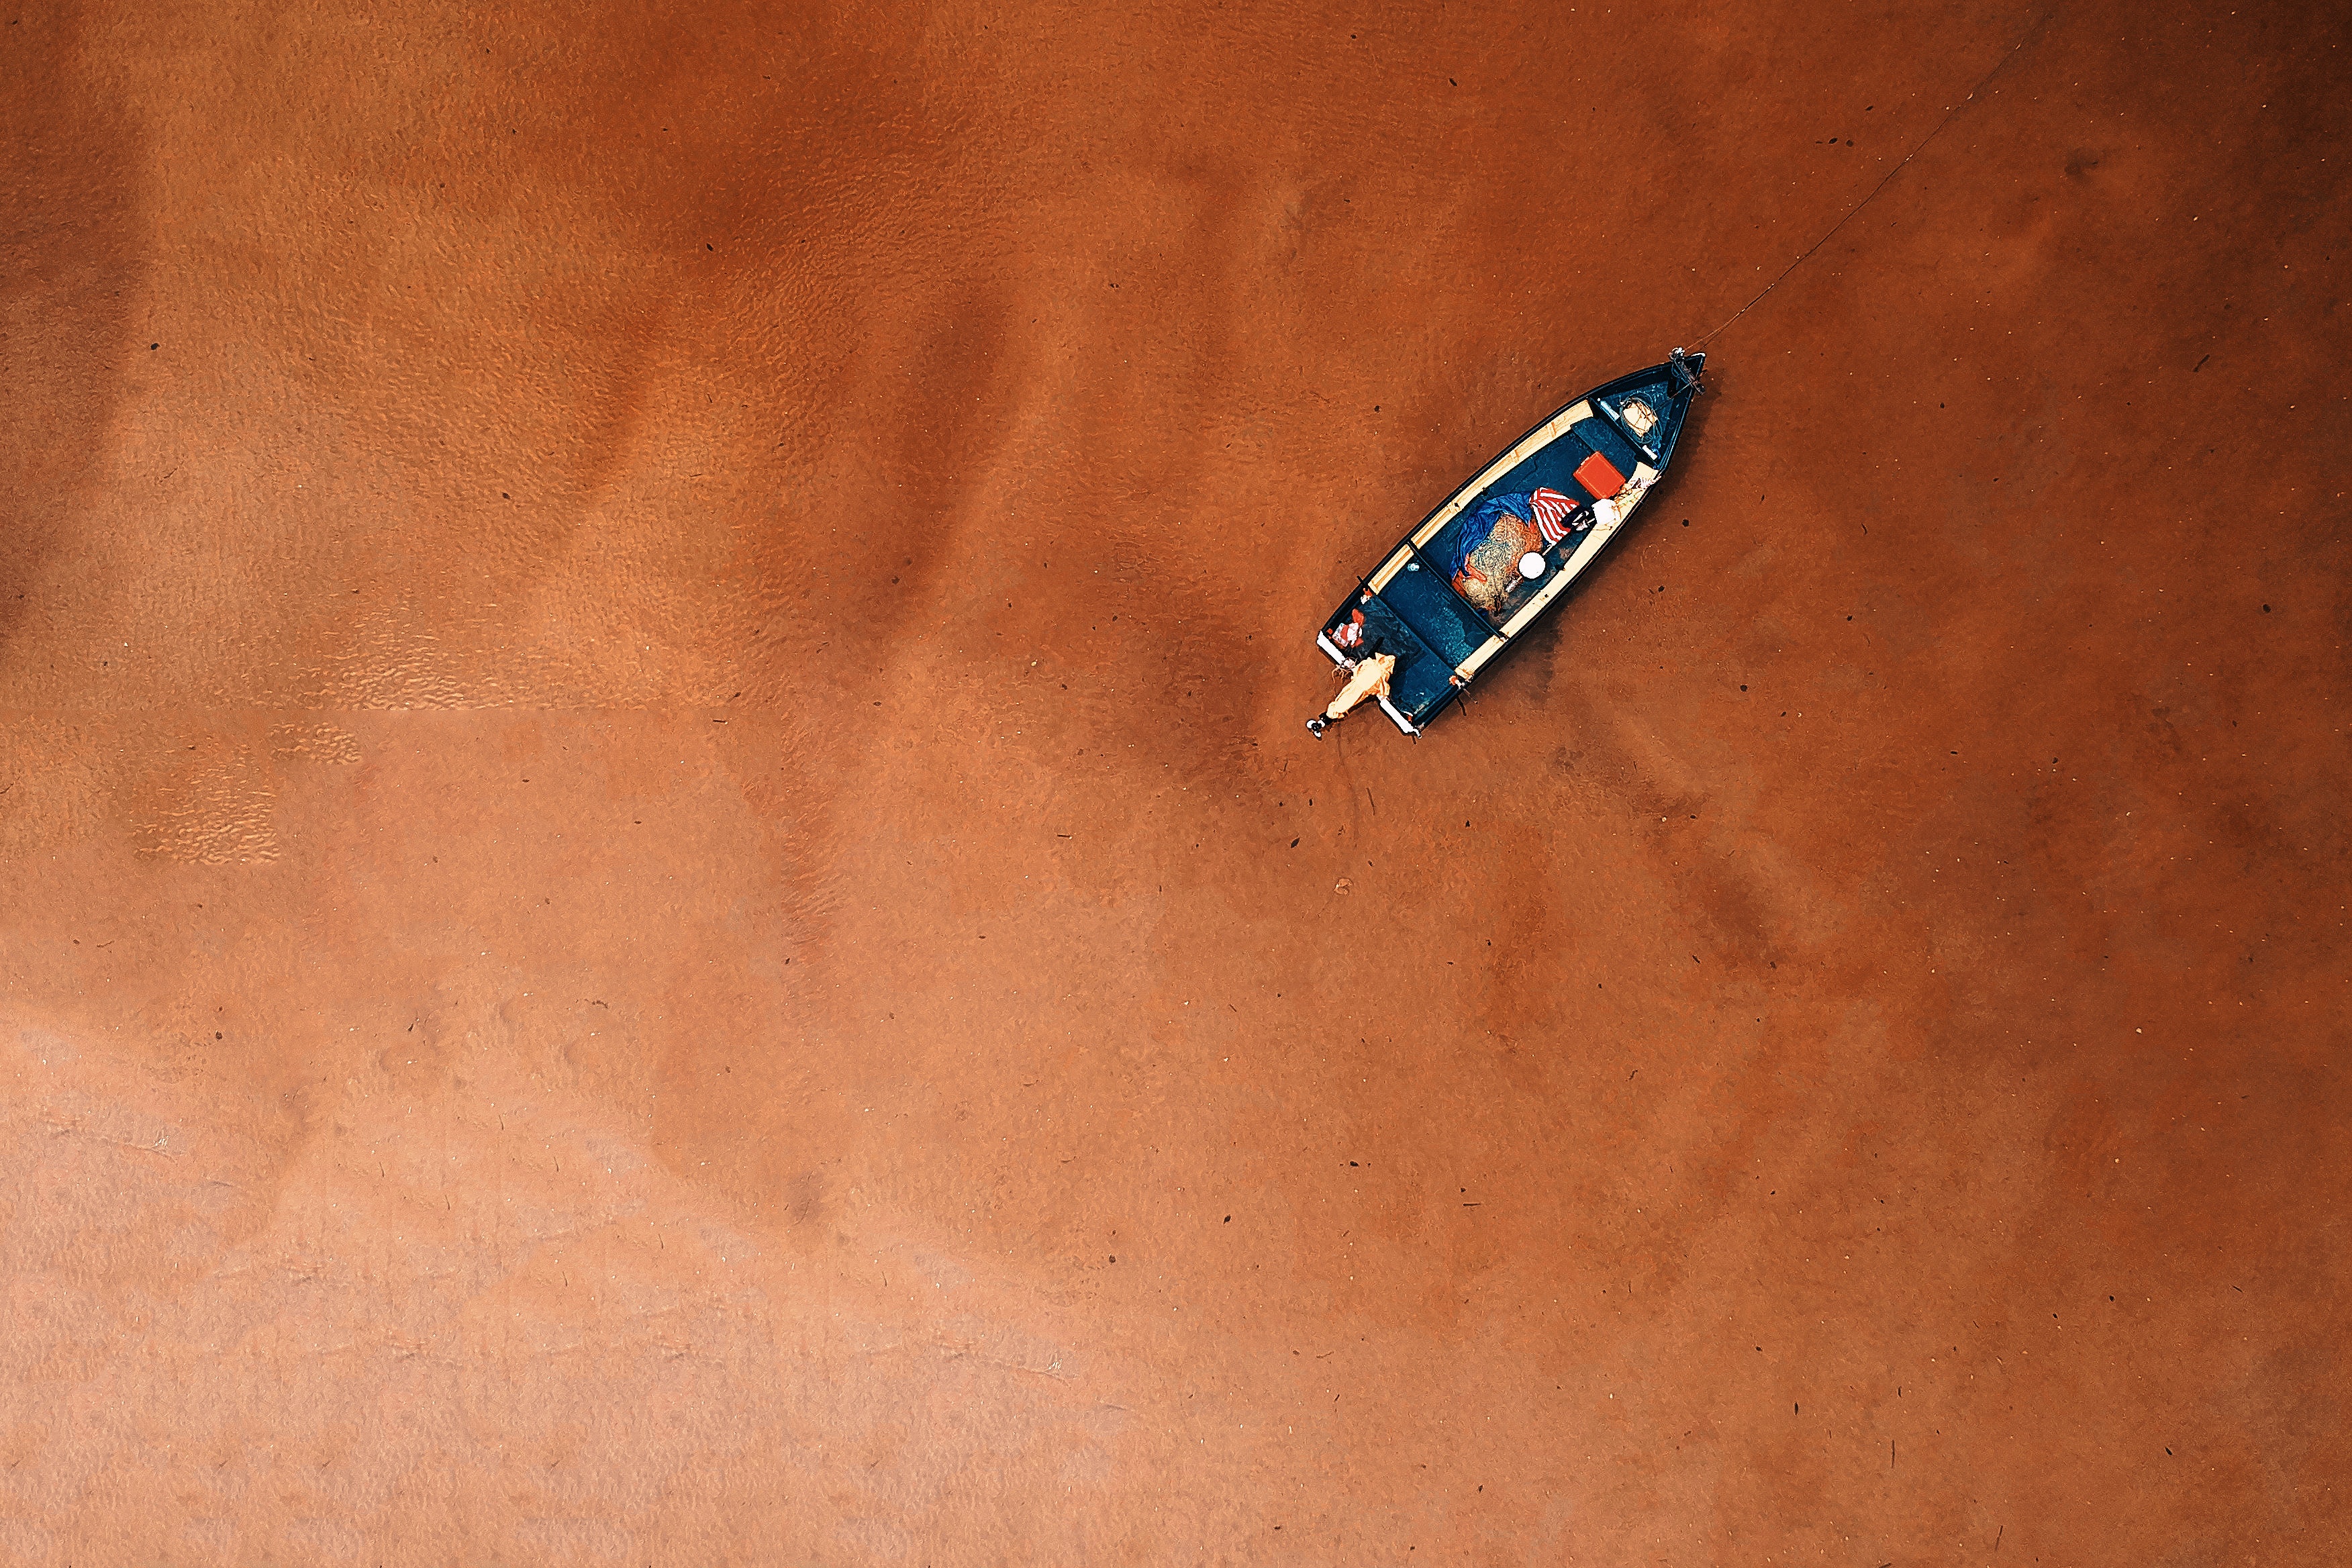 Bird's eye view of a boat on the seashore